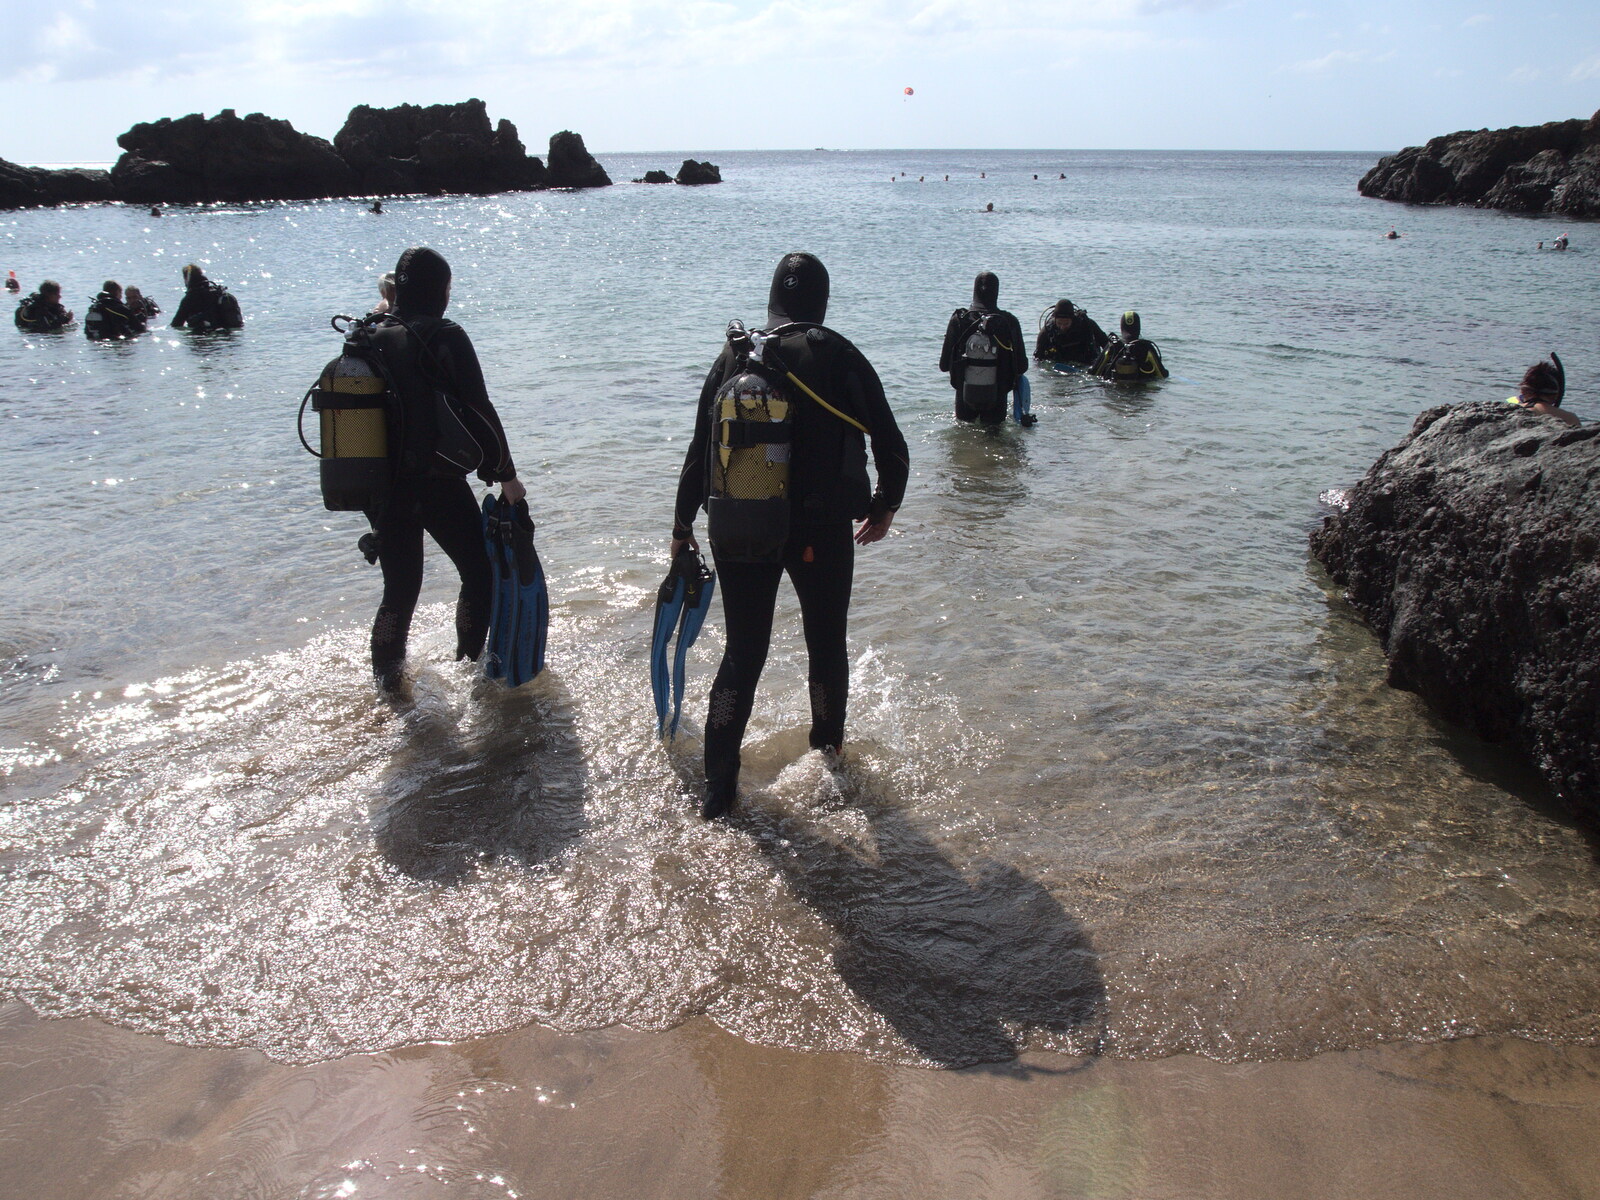 The divers head off into the sea from The Volcanoes of Lanzarote, Canary Islands, Spain - 27th October 2021